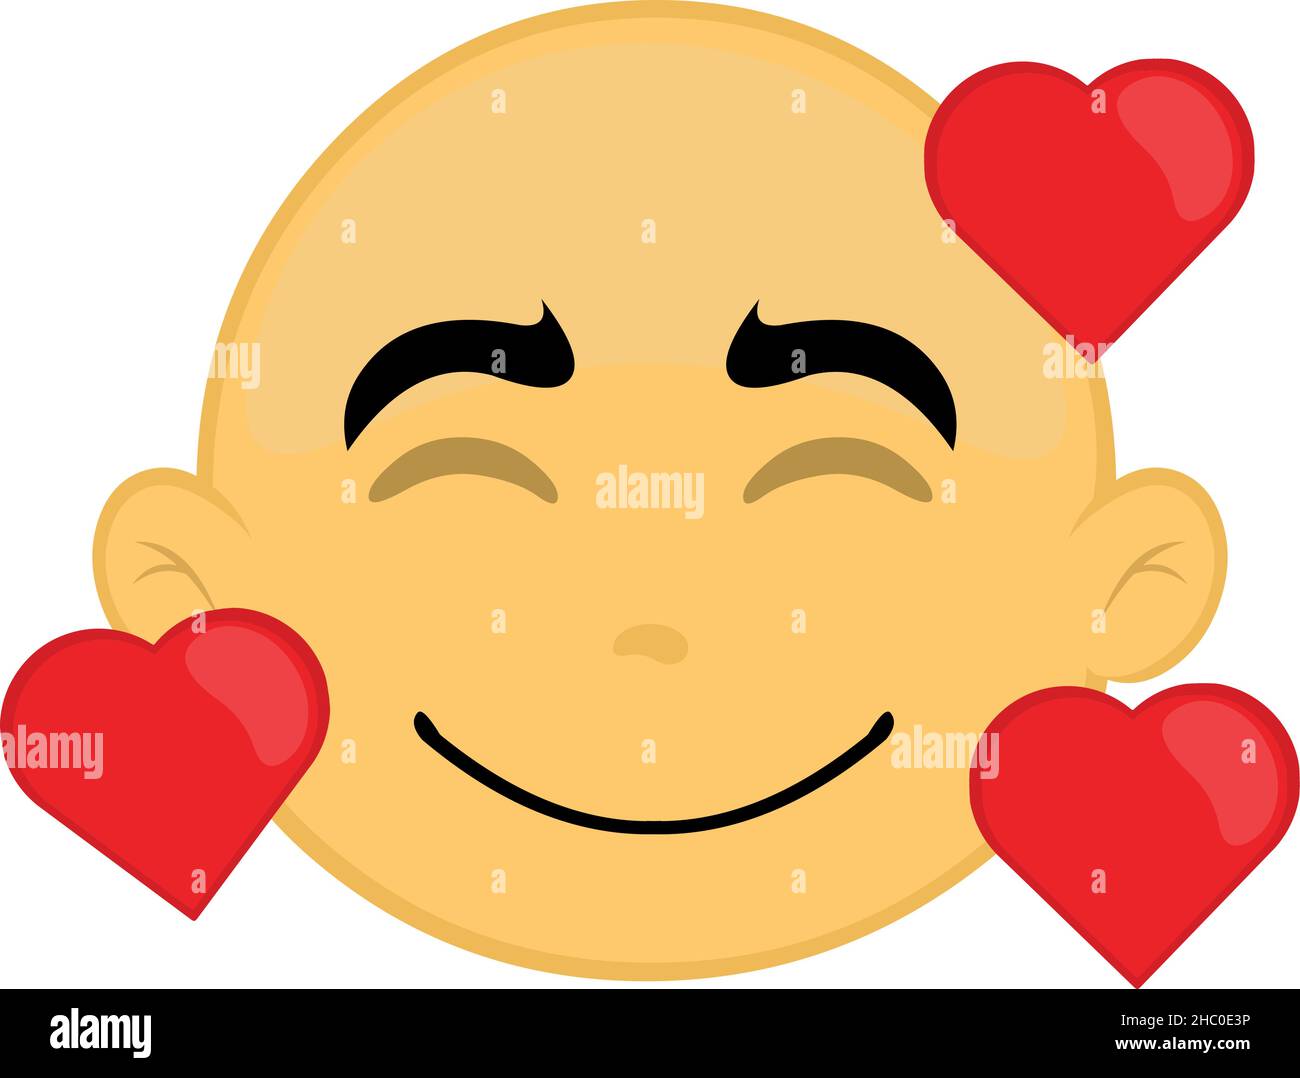 Vector illustration of the face of a cartoon character, yellow and bald, surrounded by hearts Stock Vector